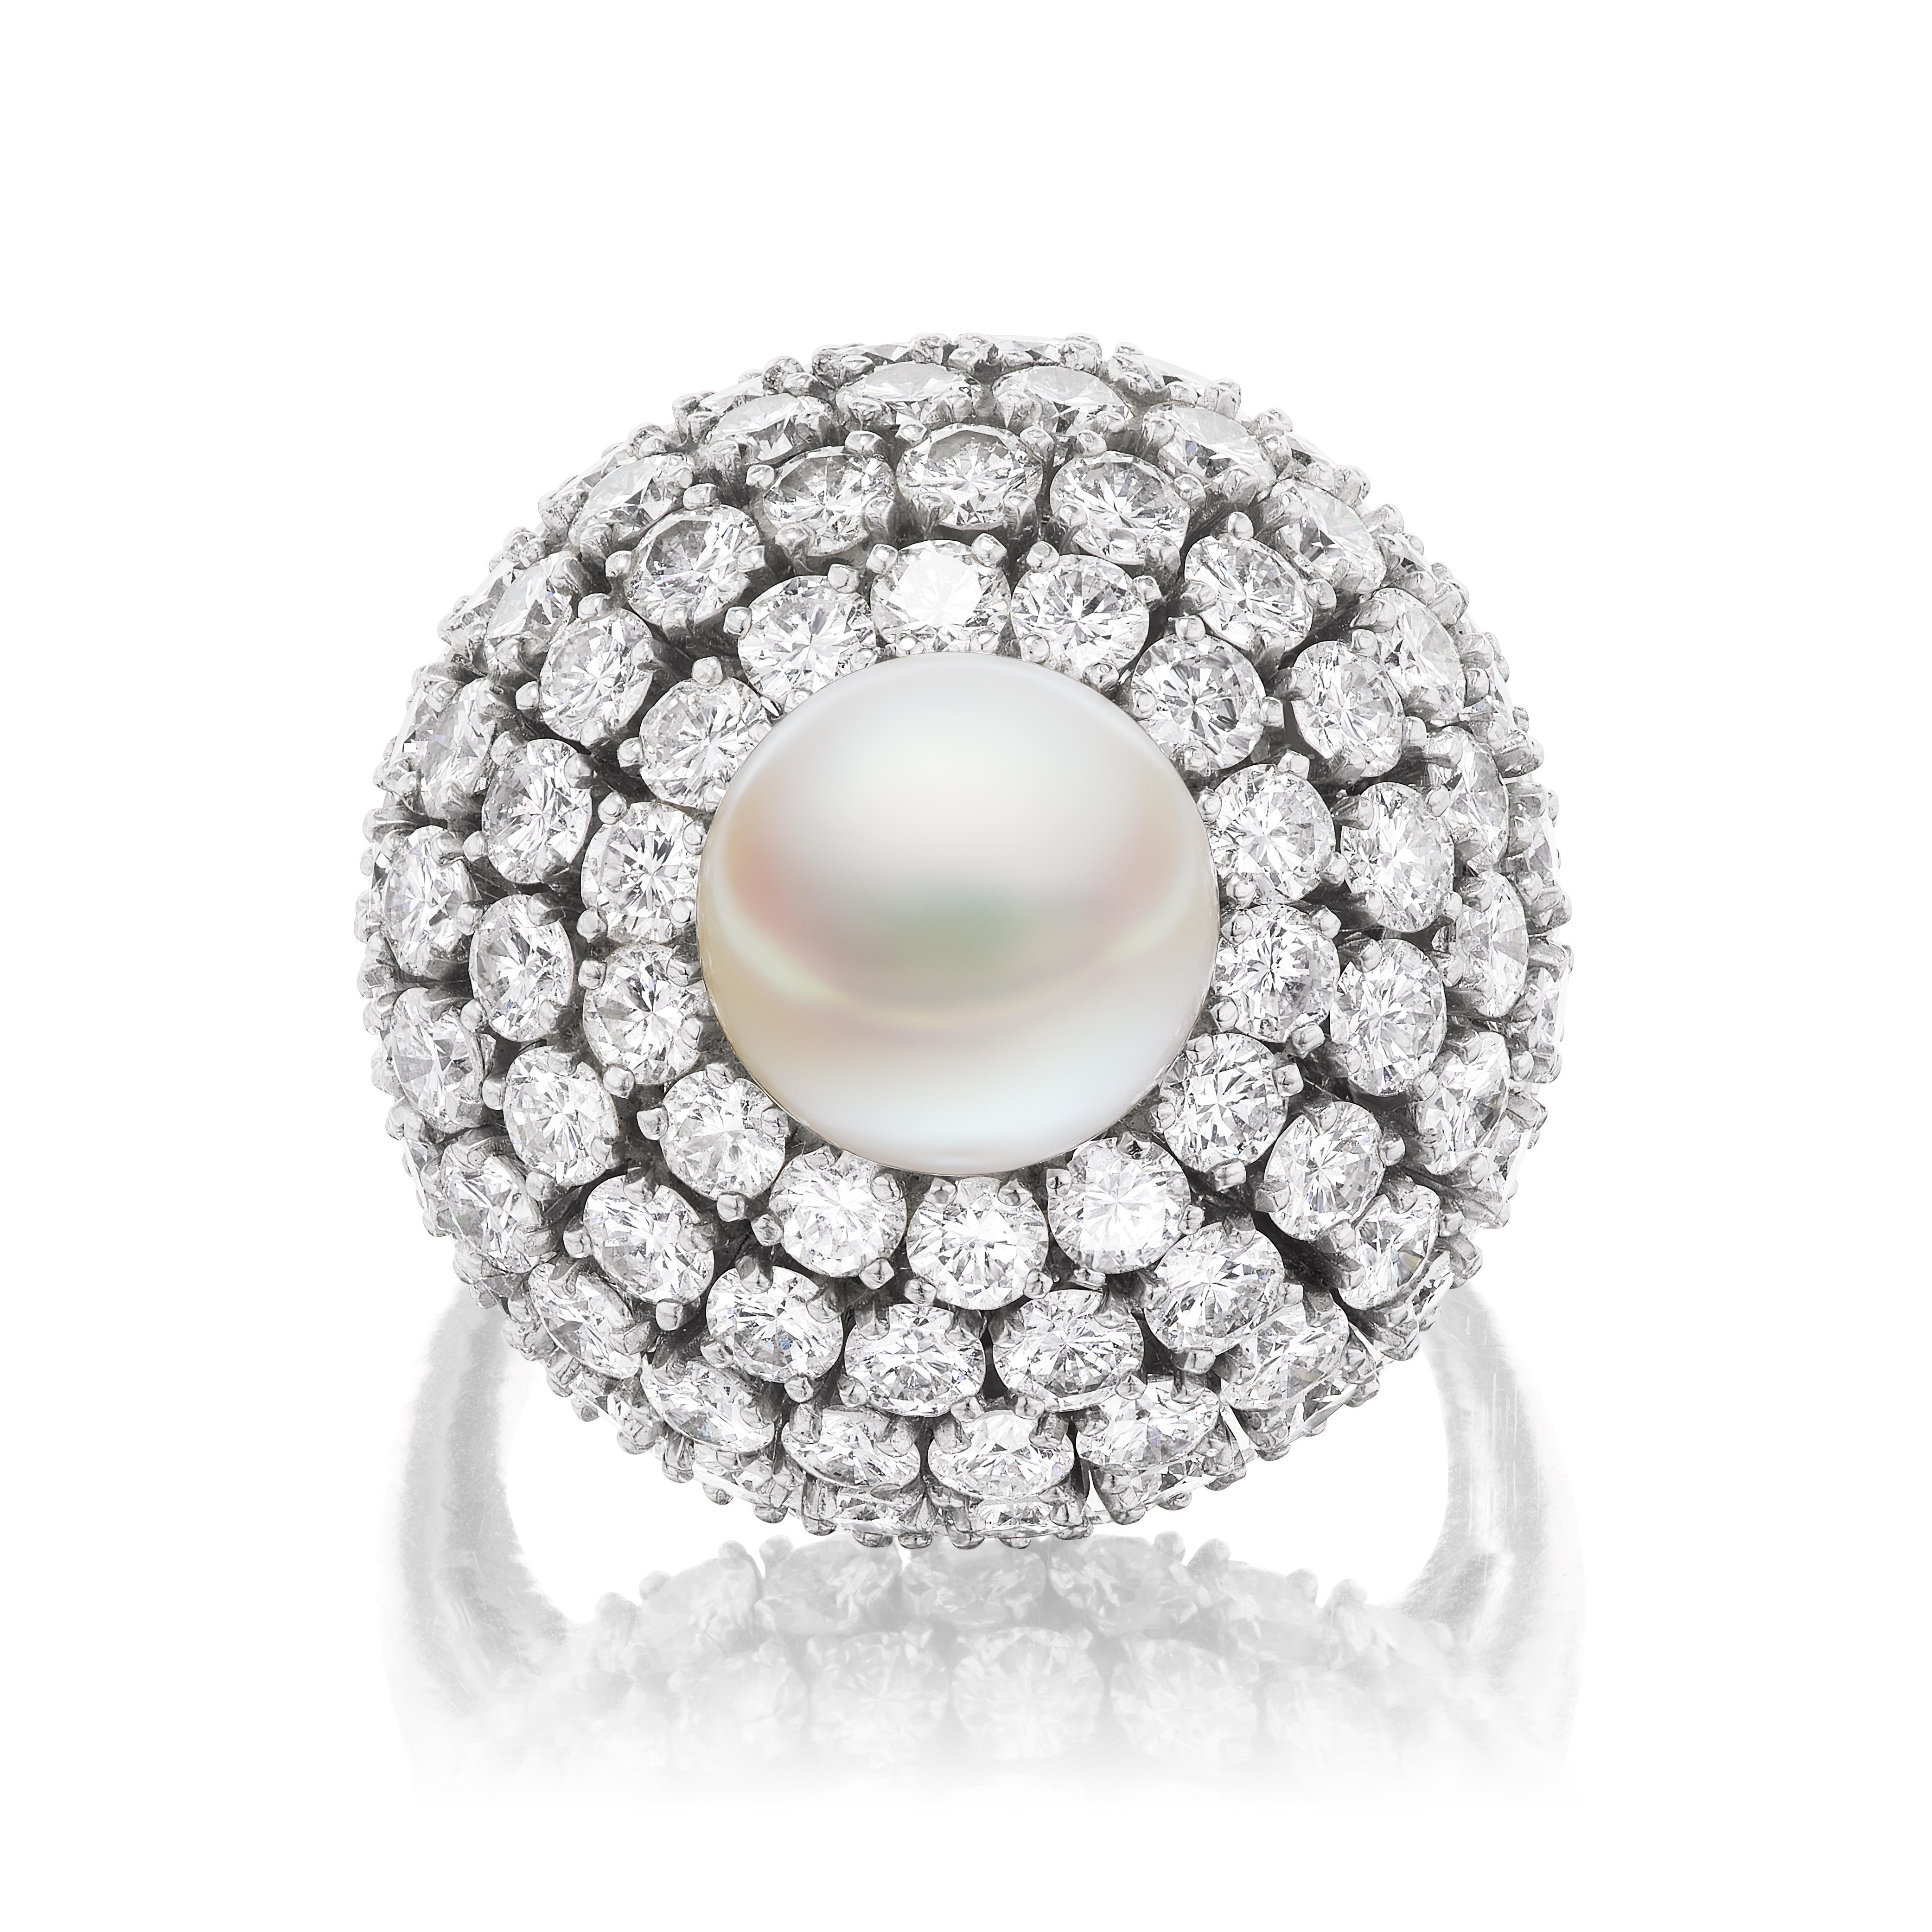 A beautiful assemblage of 108 round brilliant diamonds weighing approximately 6 carats accenting a lovely and impressive 9.5mm pearl perched atop this mid-century fashion bombe design. A fantastic and timeless cocktail ring to enhance any collection.